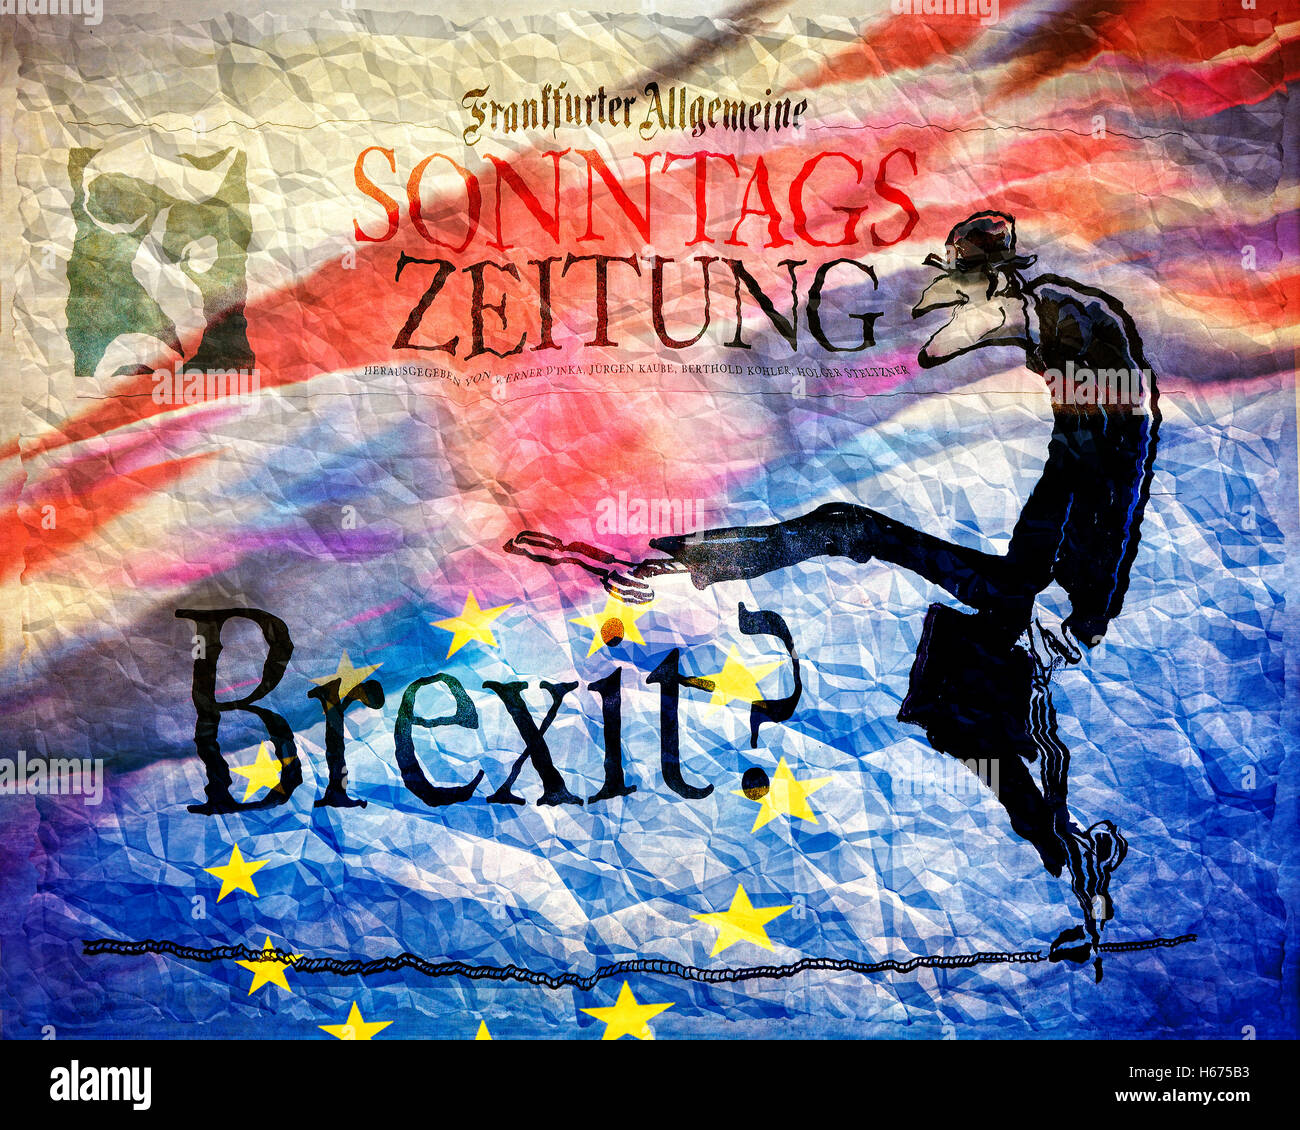 BREXIT CONCEPT: How Others See Us - Frankfurter Allgemeine Sonntags Zeitung , Germany. Stock Photo